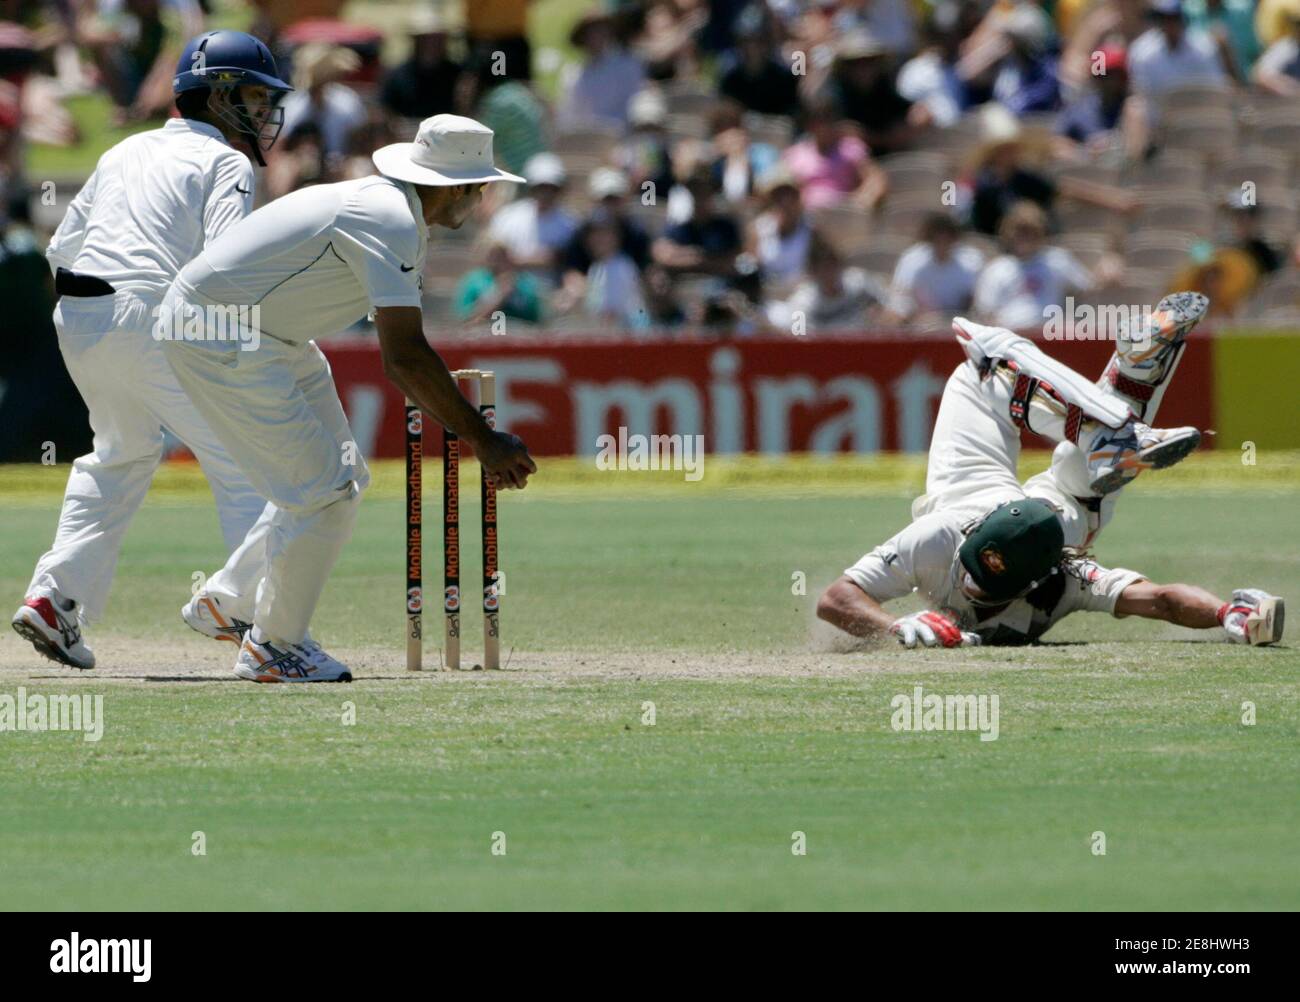 Australia's Andrew Symonds (R) dives for the crease as India's Mahendra Dhoni (L) and VVS Laxman (2nd L) combine to field during the fourth day of their fourth and final test cricket match at the Adelaide Oval January 27, 2008. REUTERS/Will Burgess   (AUSTRALIA) Stock Photo